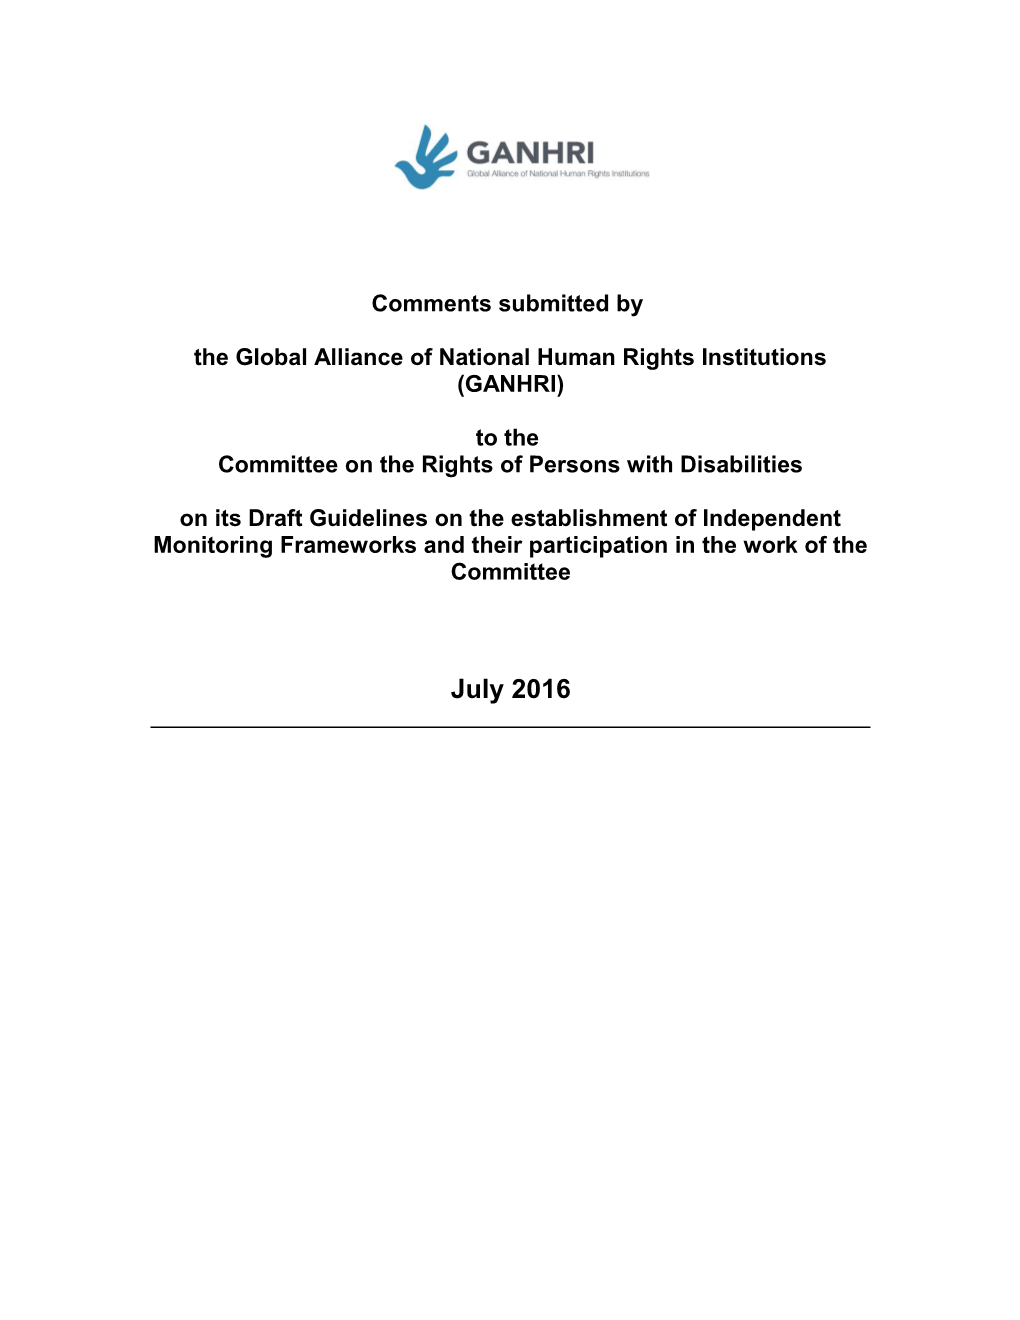 The Global Alliance of National Human Rights Institutions (GANHRI)